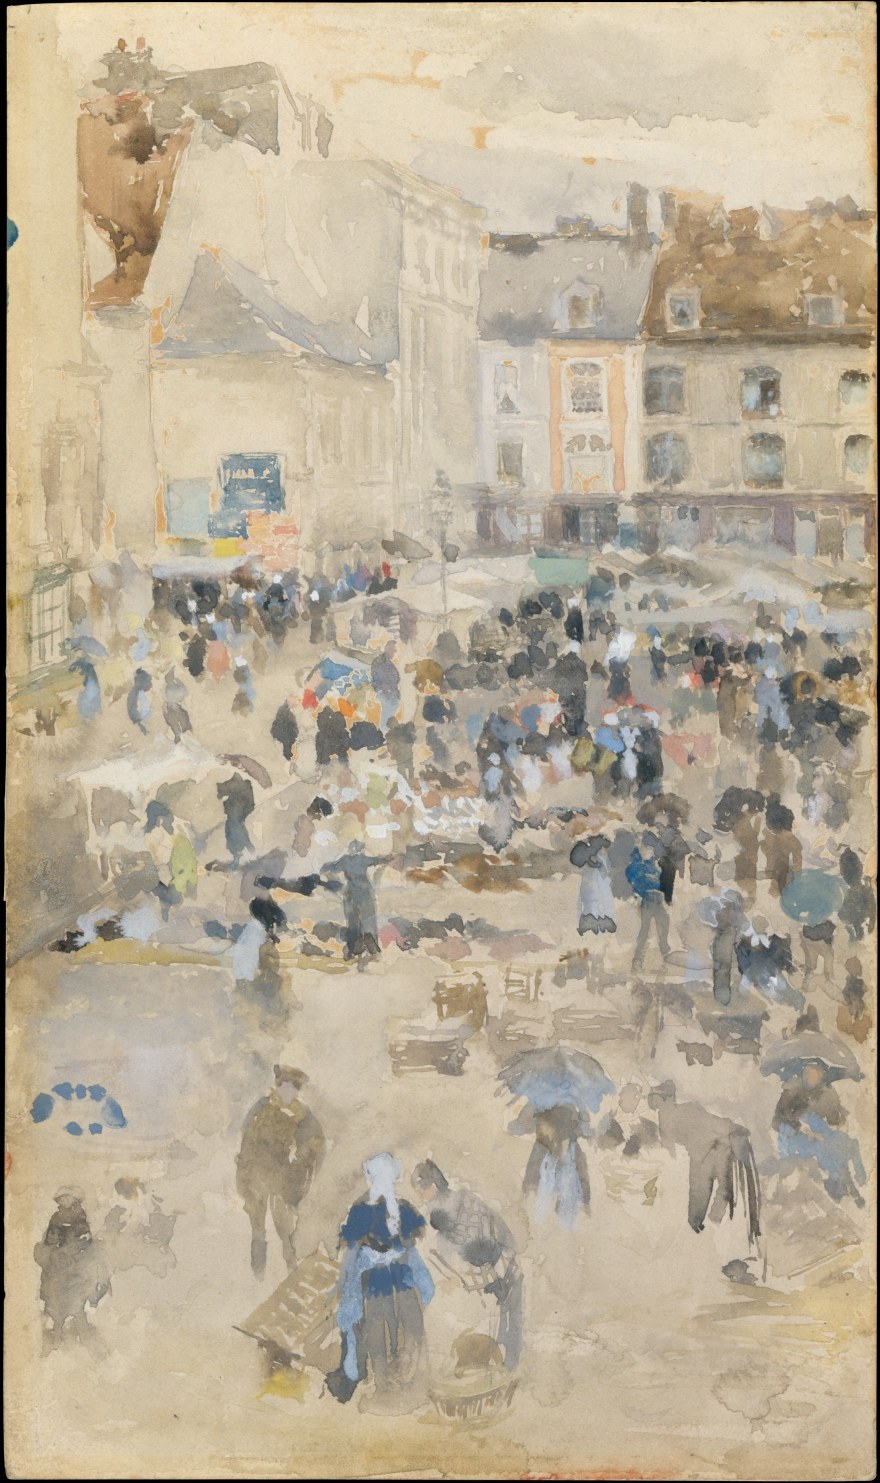 Società – James Abbot McNeill Whistler- Variations in violet and grey-Market place, Dieppe – (1885) – MOMA